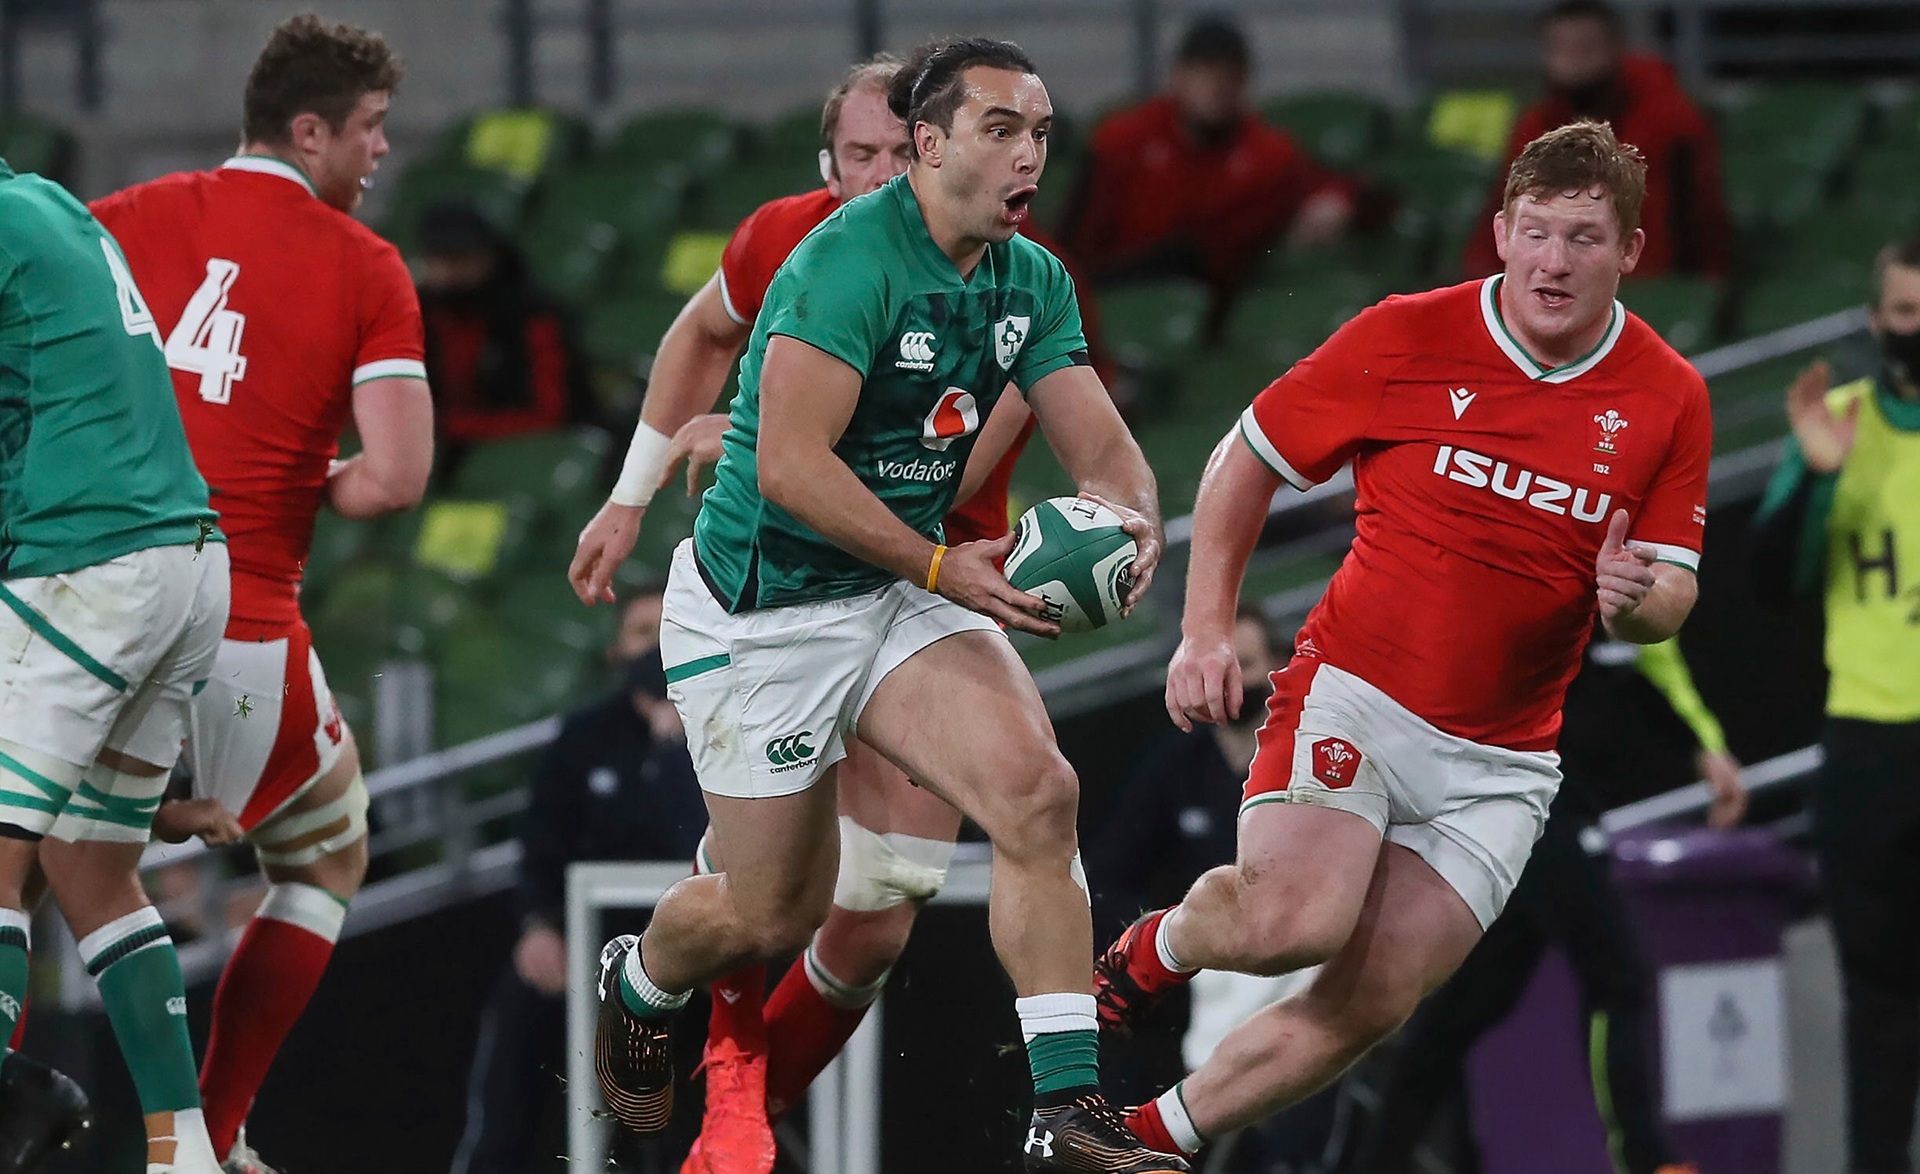 Rugby Kiwi James Lowe scores on debut as Ireland thrash Wales in Nations Cup opener in Dublin